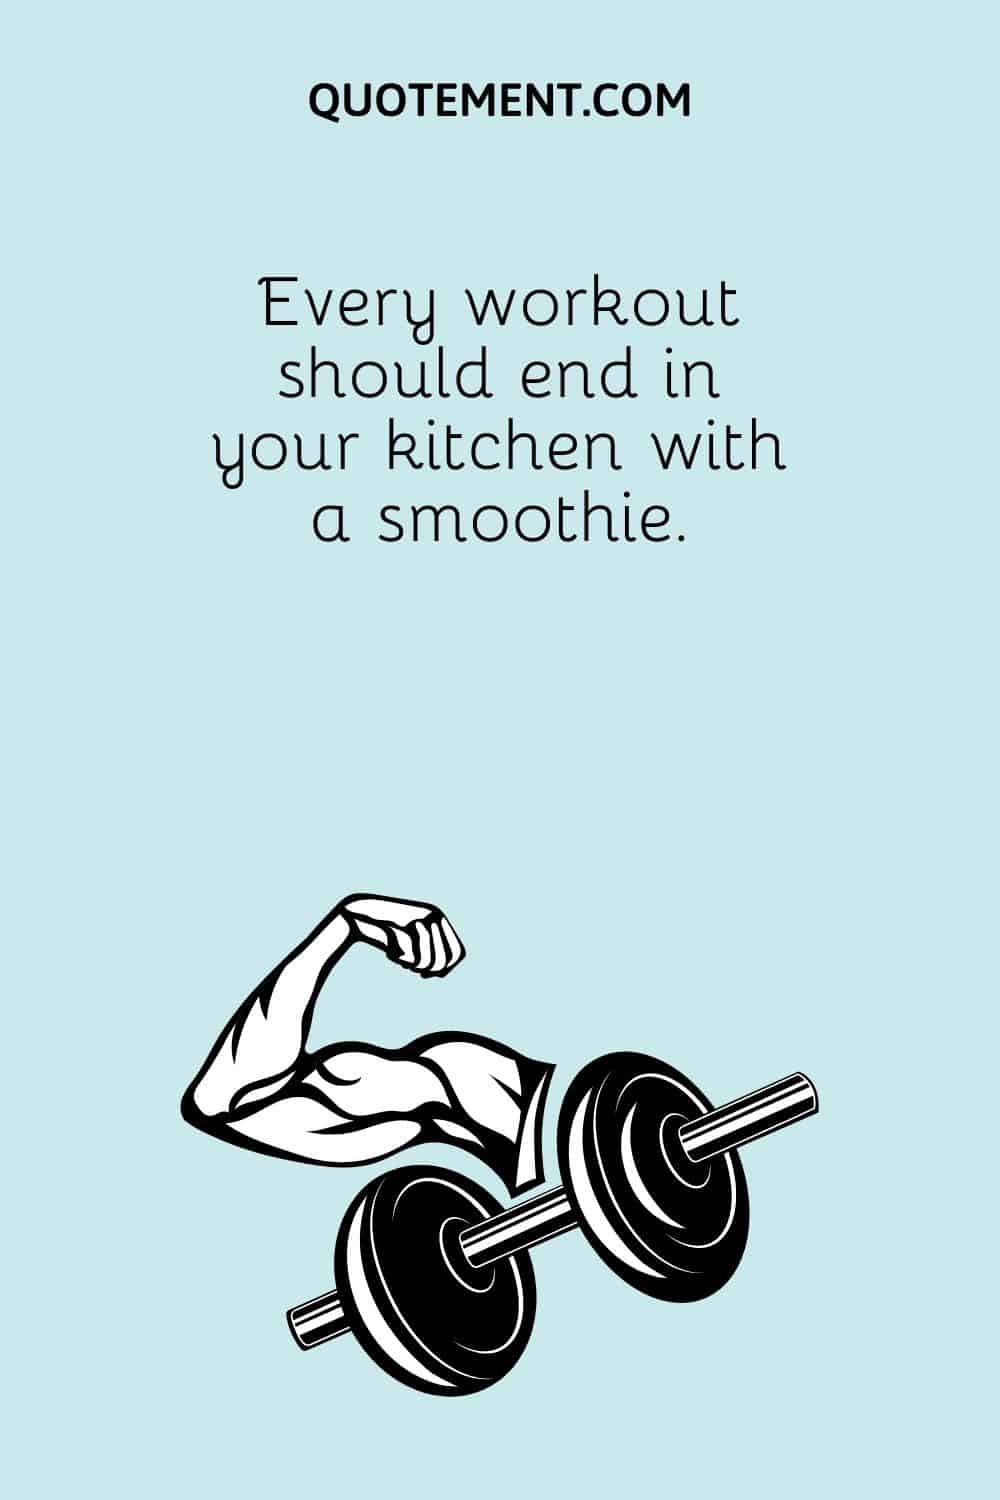 Every workout should end in your kitchen with a smoothie.